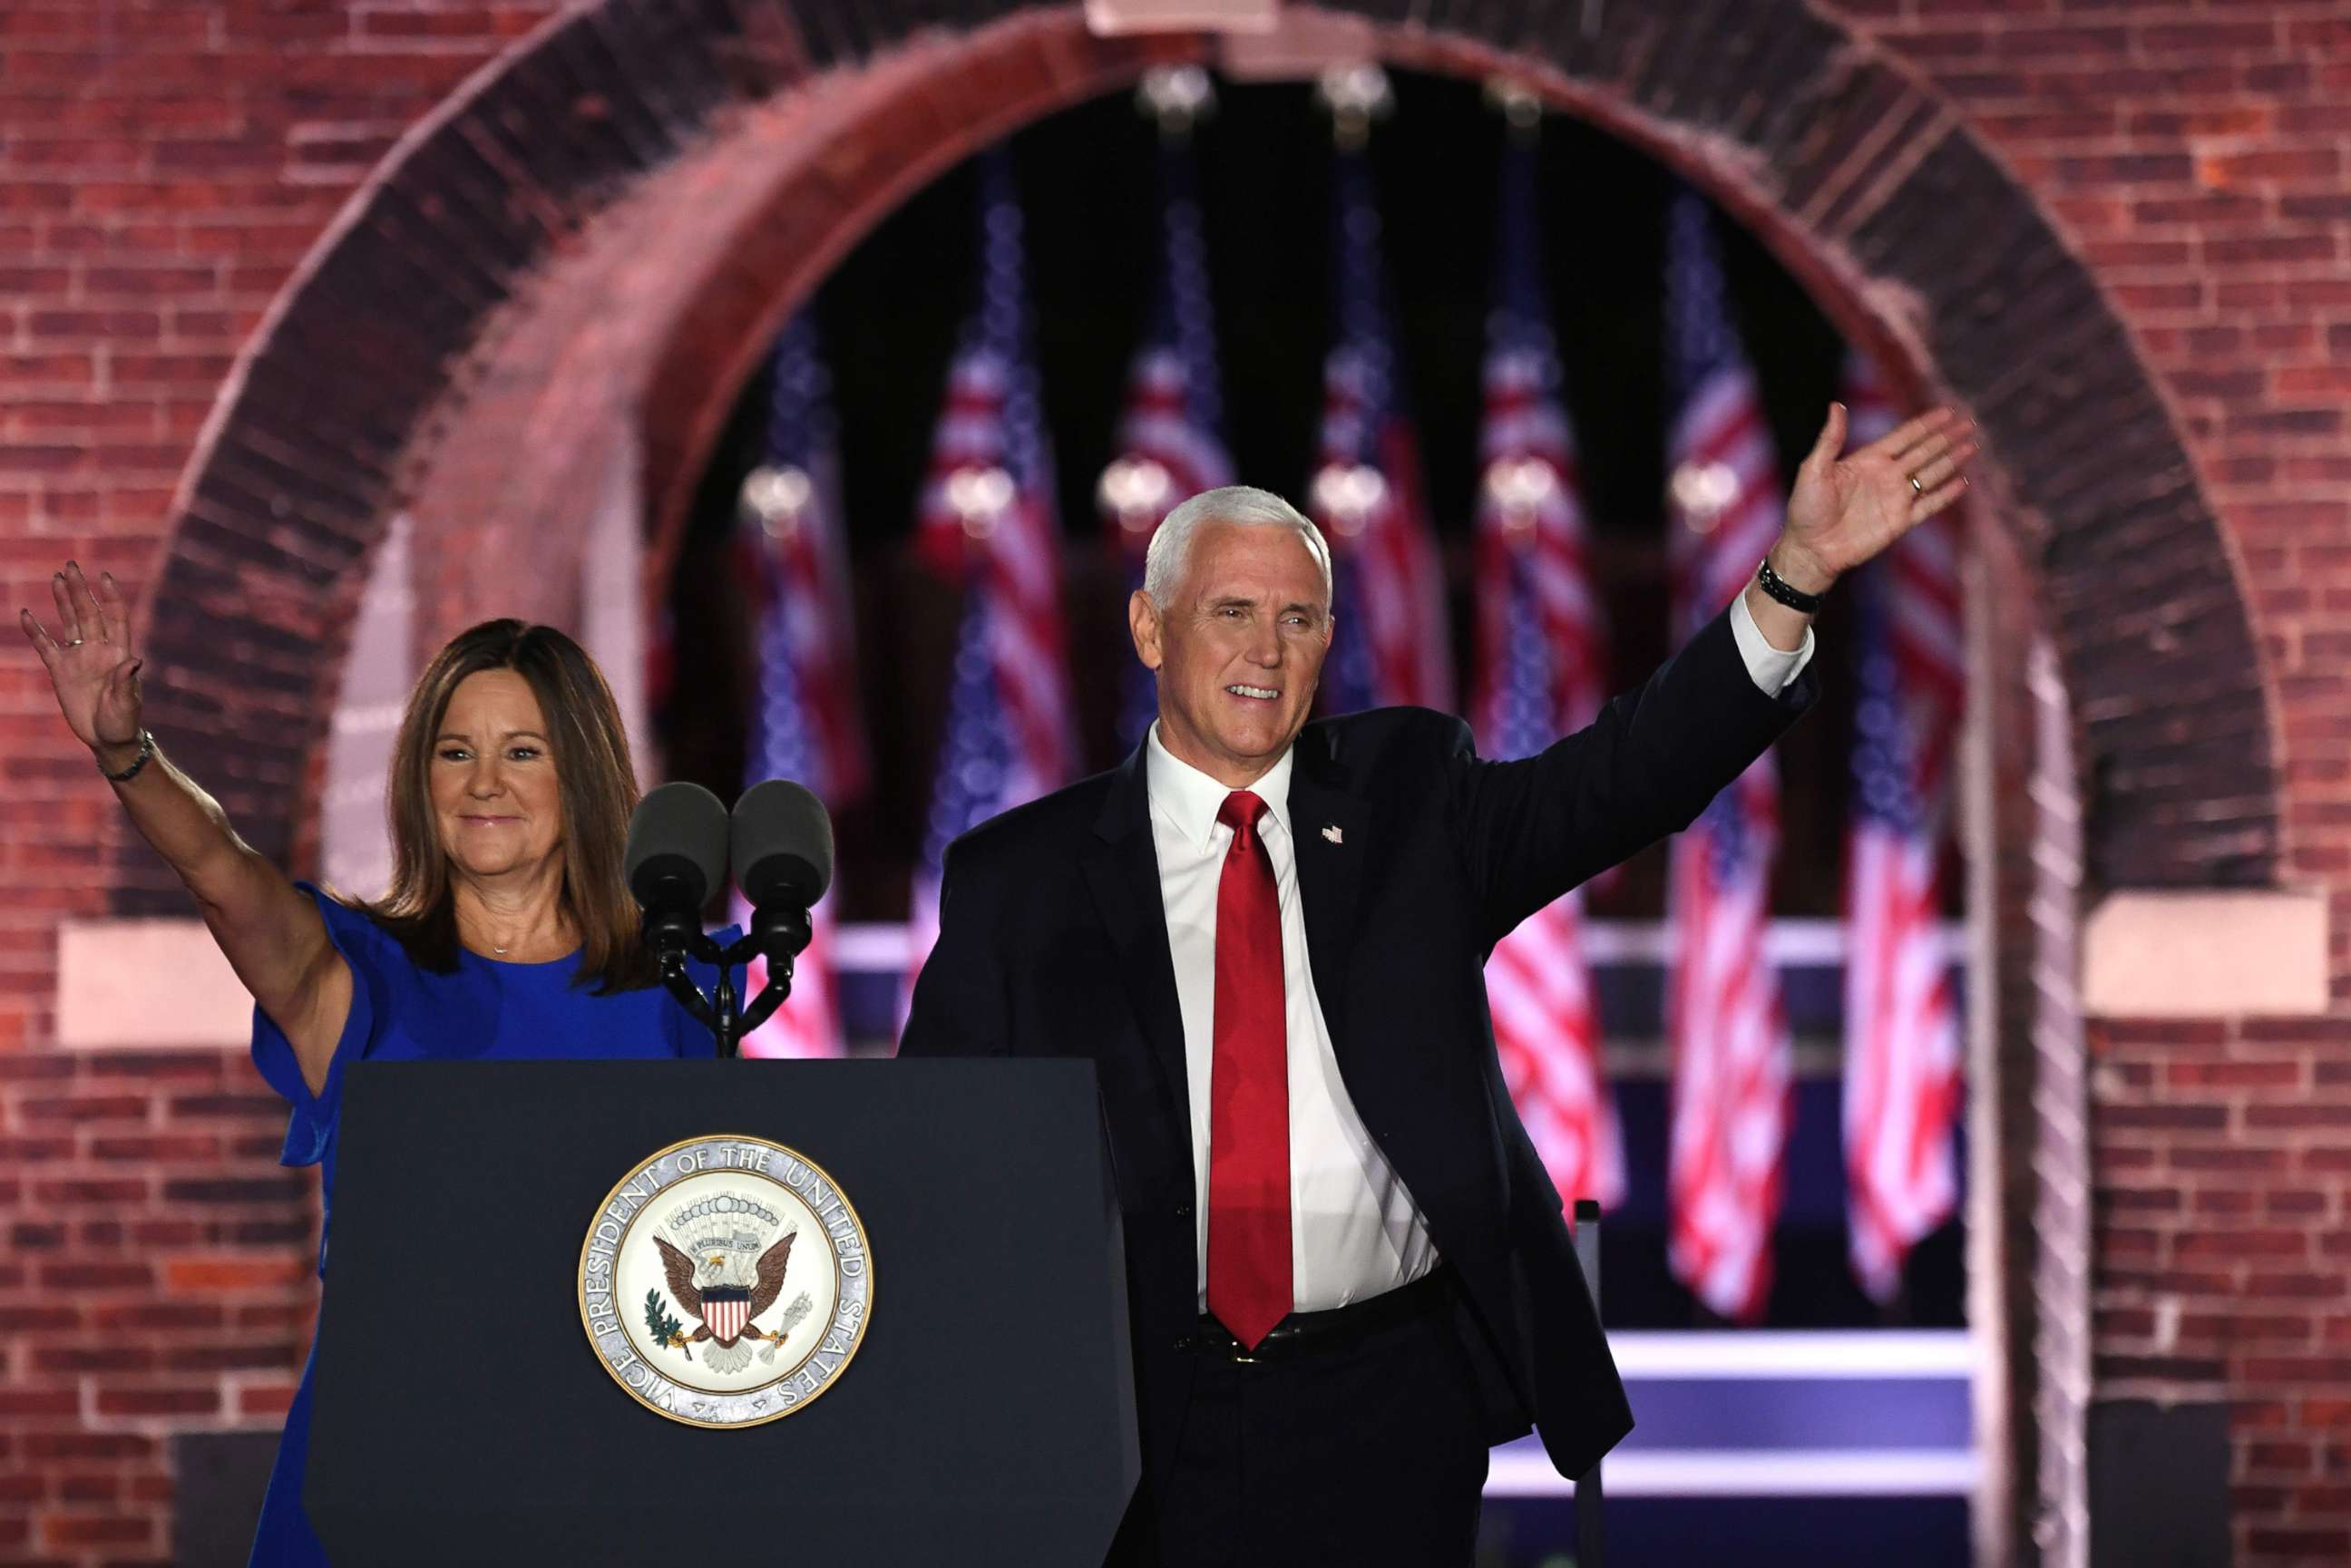 PHOTO: Vice President Mike Pence arrives with wife Karen Pence before speaking during the third night of the Republican National Convention at Fort McHenry National Monument in Baltimore, Aug. 26, 2020.